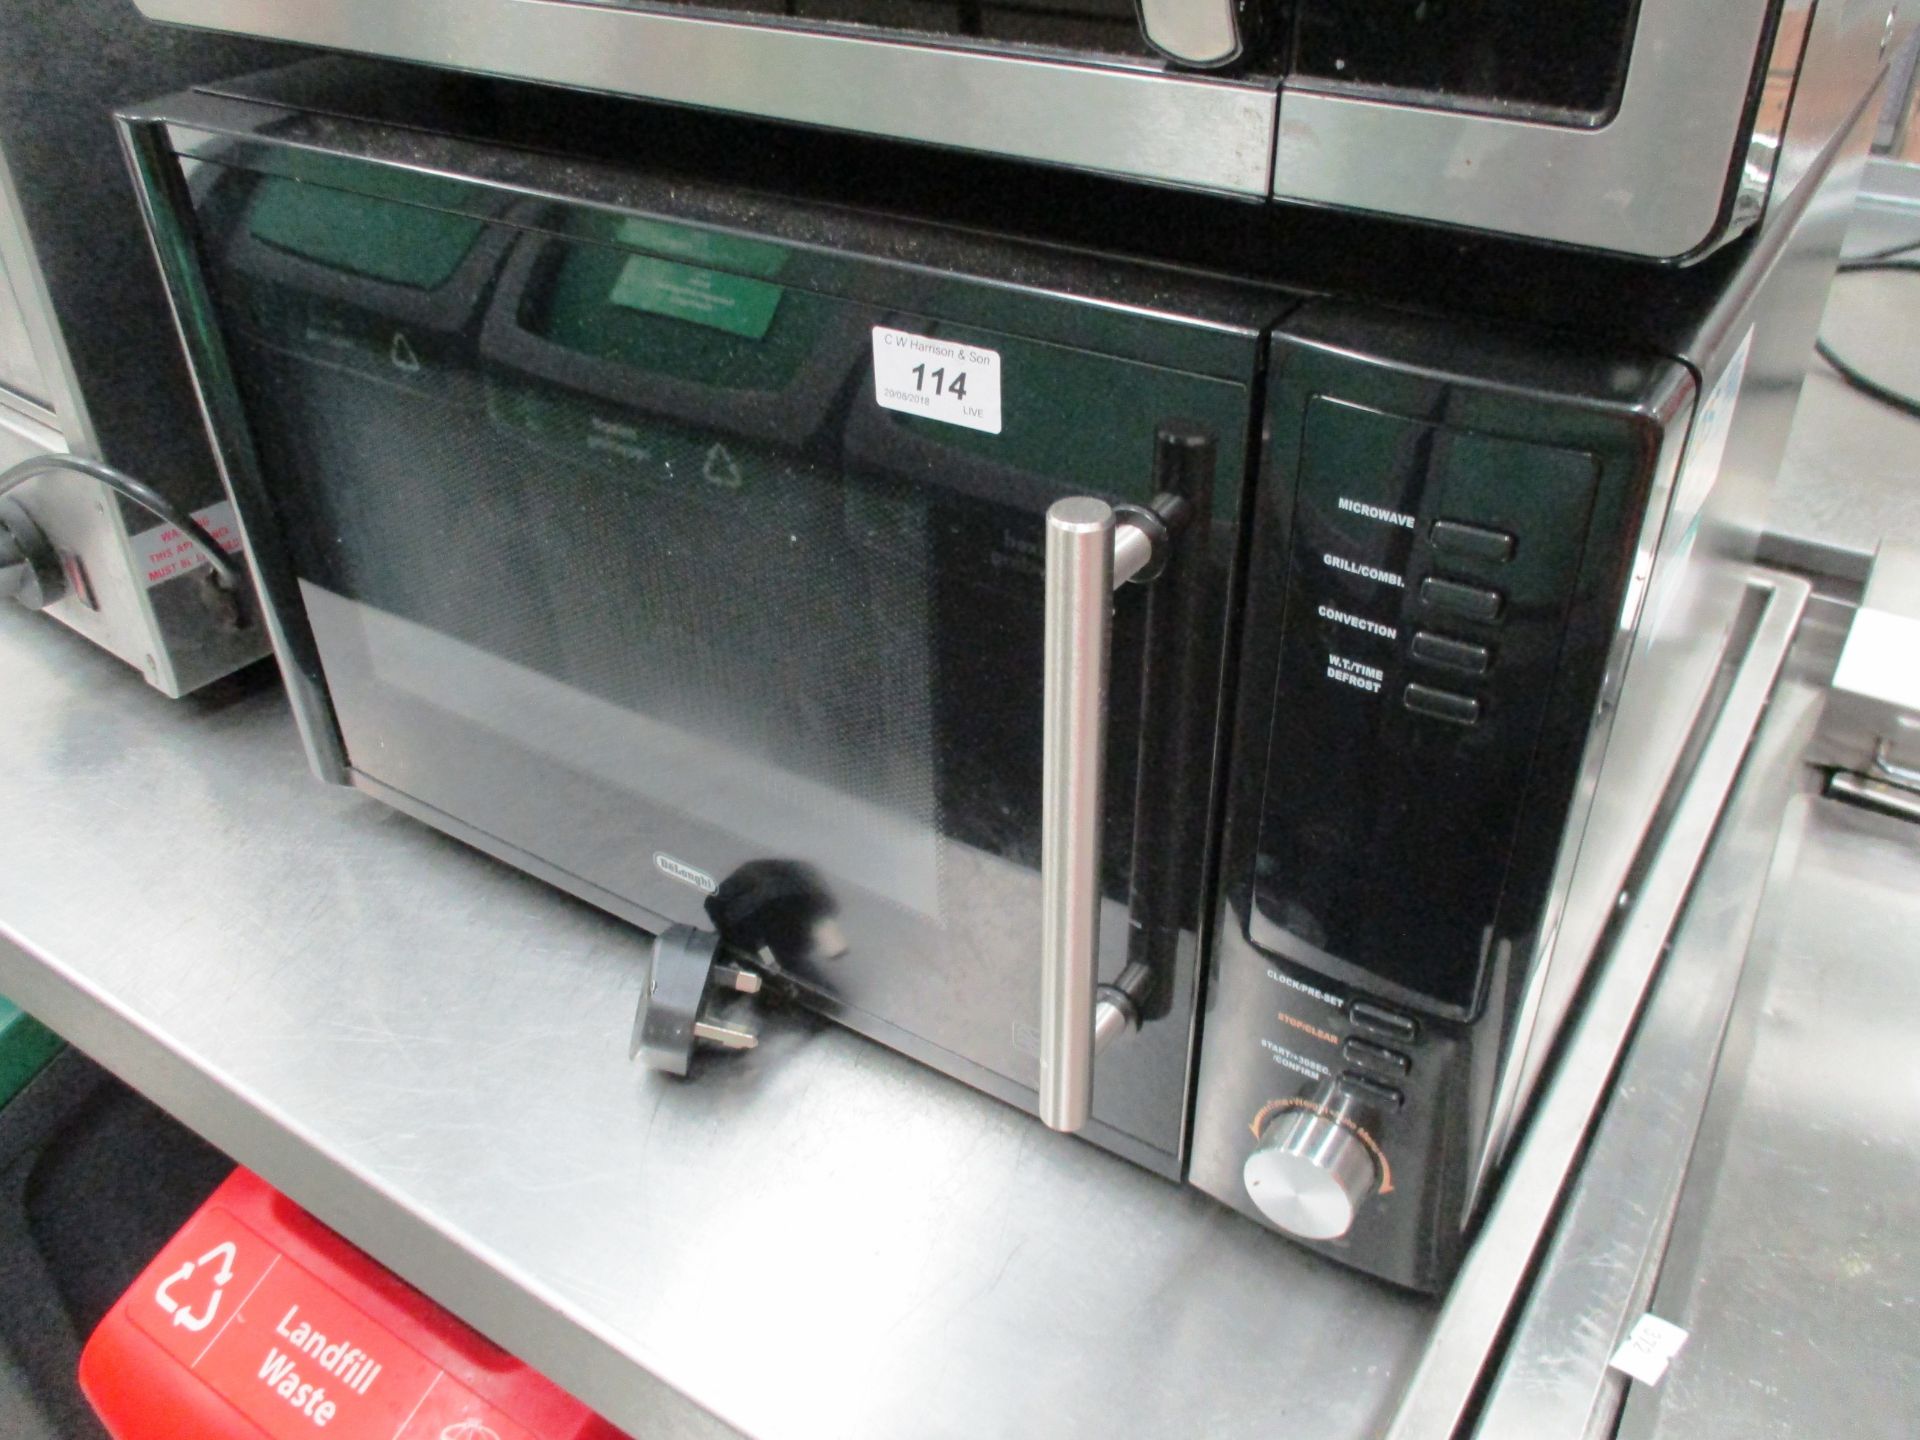 A Delonghi microwave oven